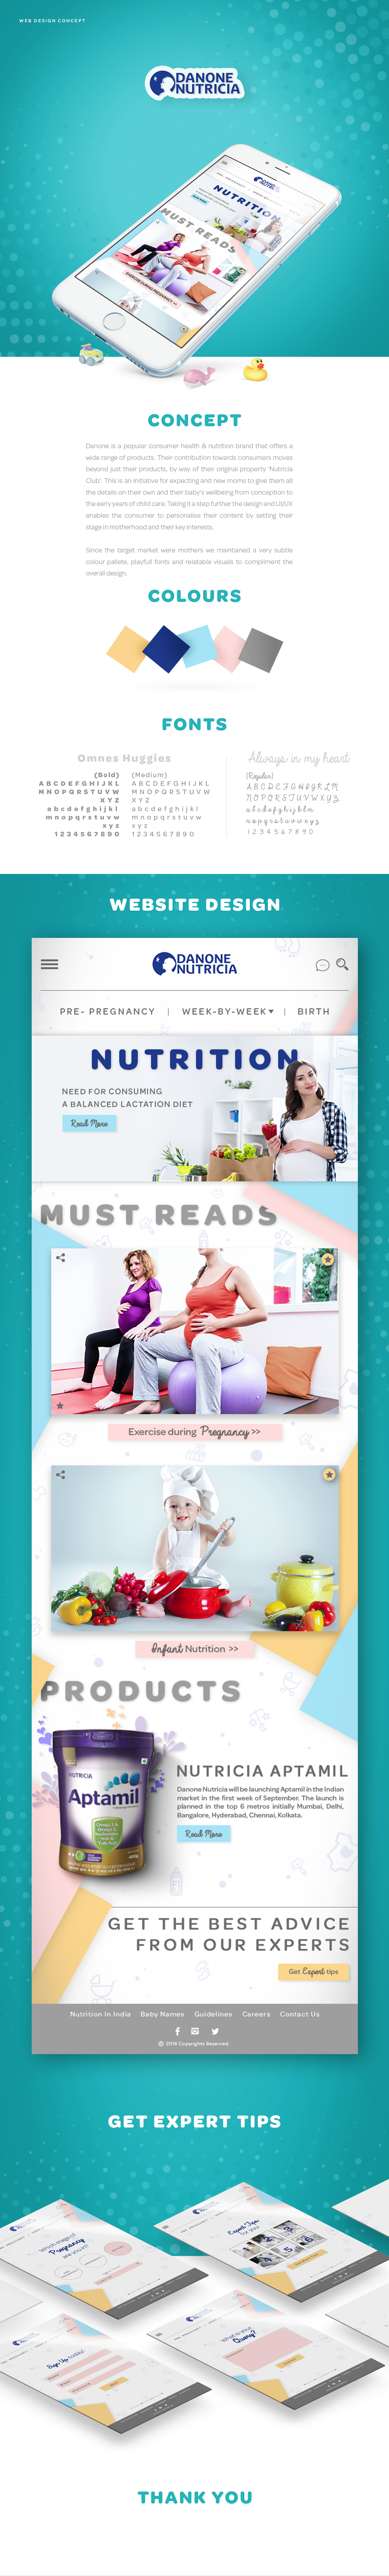 pregnancy UI/UX mother care baby supplements